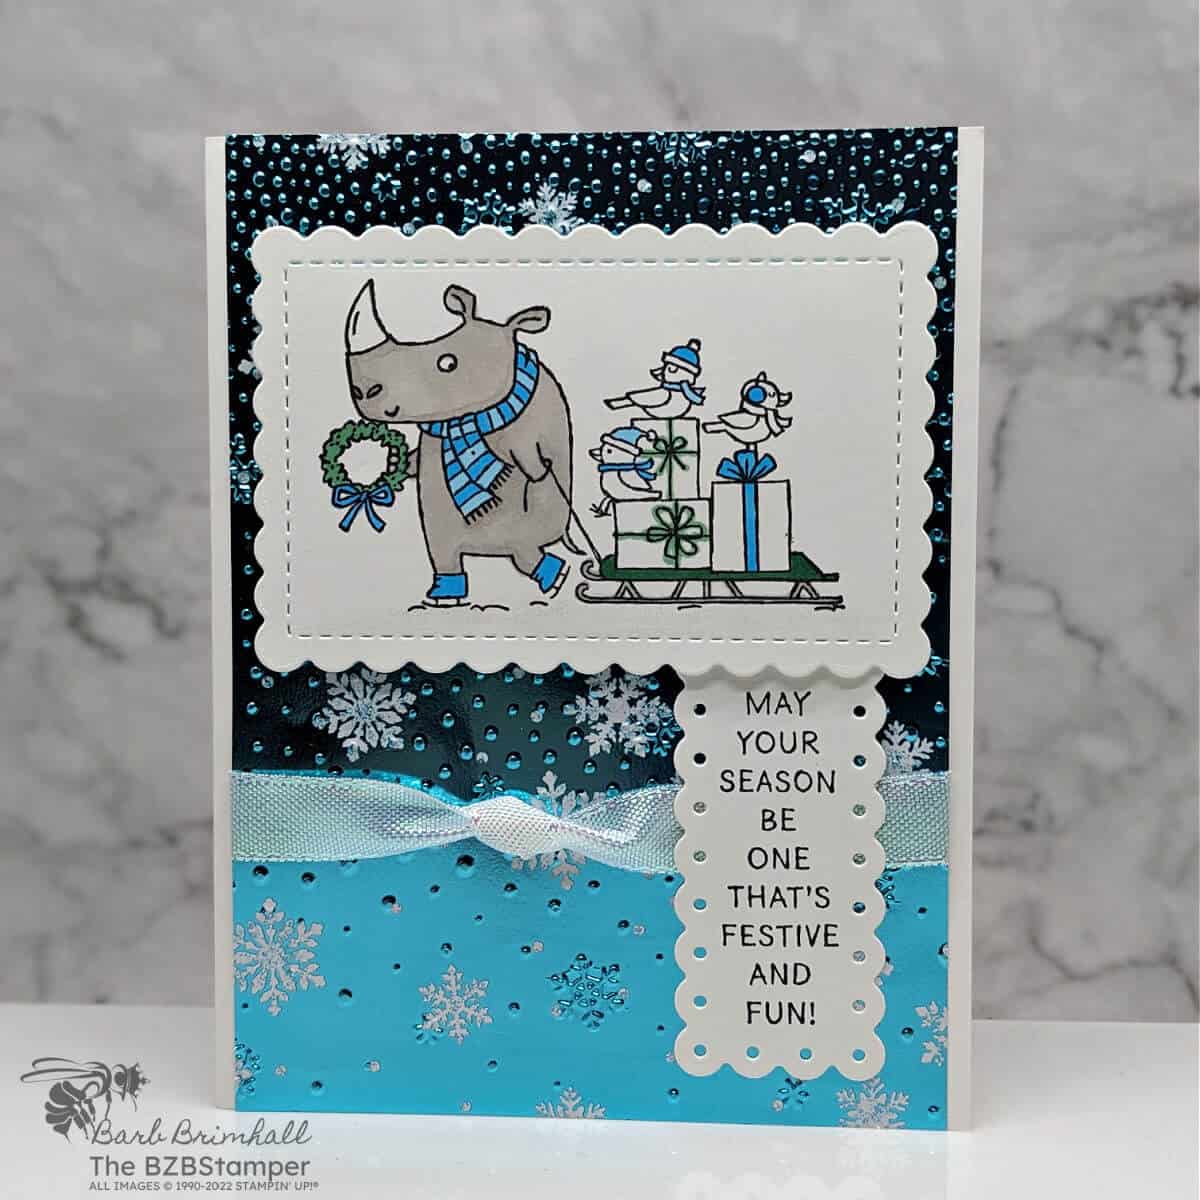 Adorable Christmas Card using the Festive and Fun Stamp Set by Stampin’ Up!